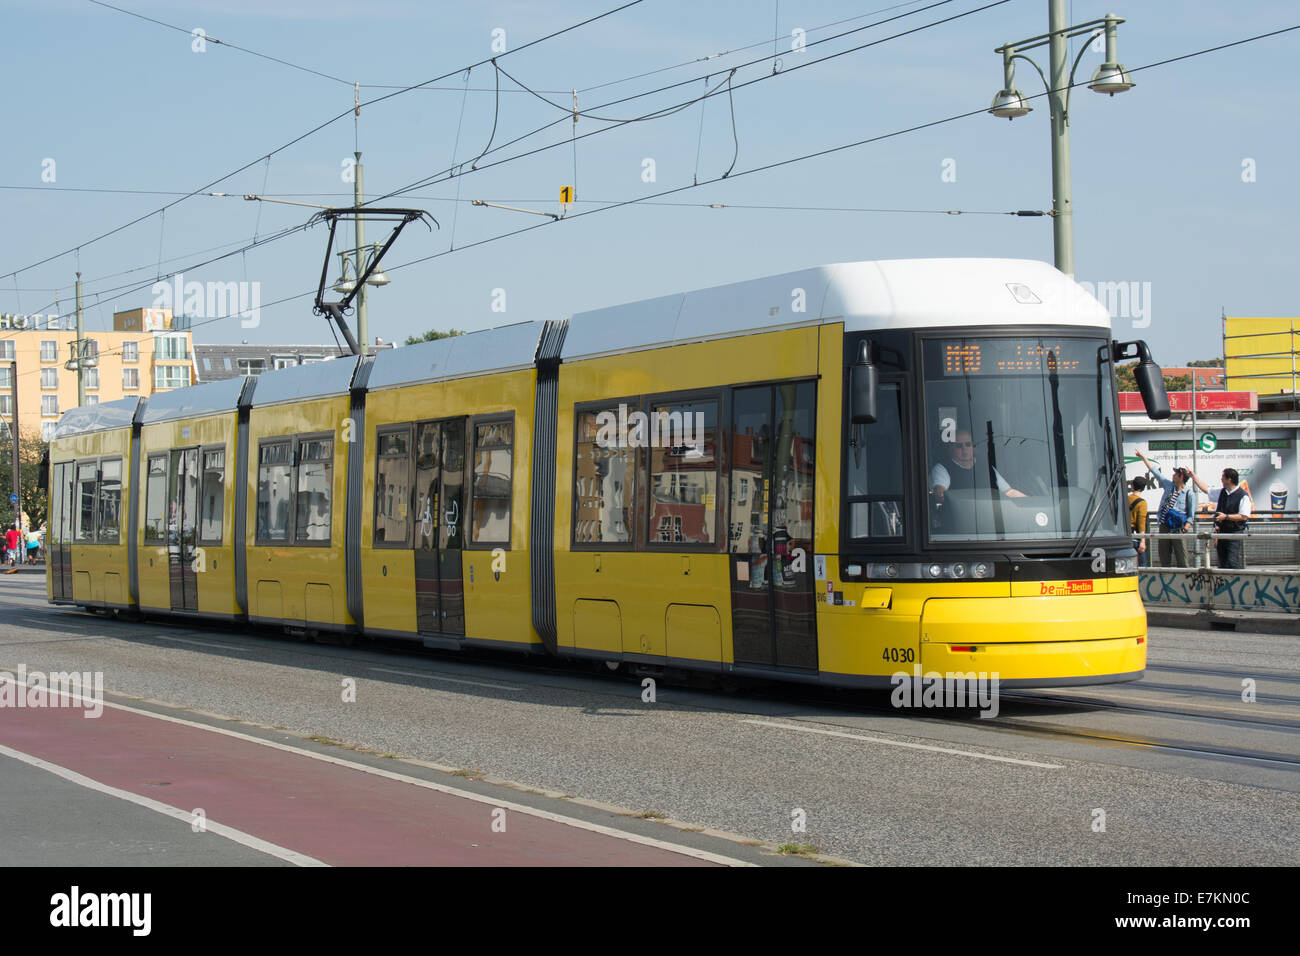 A Bombardier Flexity Berlin tram approaches the end of route M10 at Warschauer Straße in Berlin. It is operated by BVG. Stock Photo